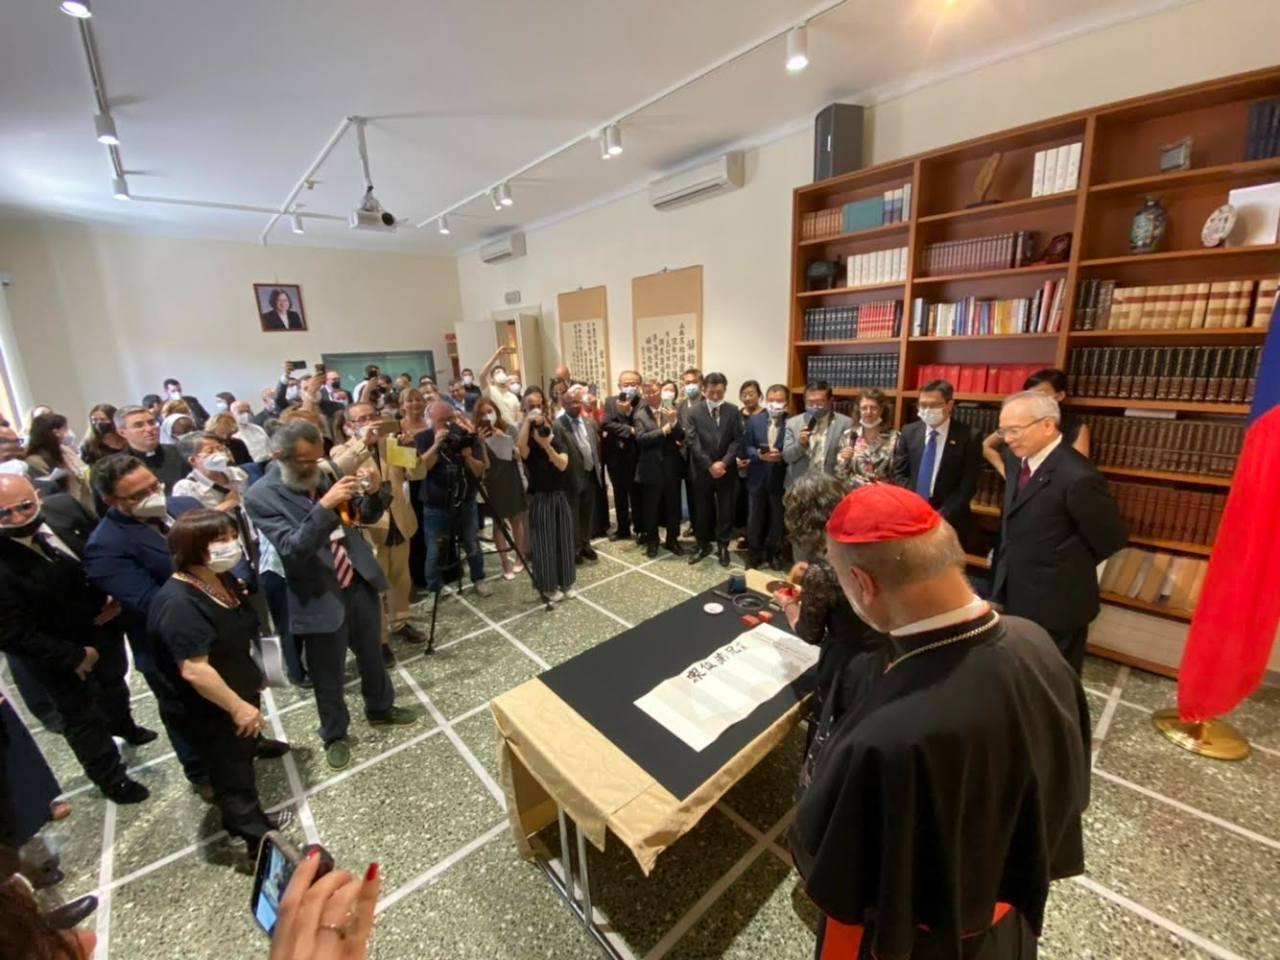      Cardinal Ravasi of the Dicastery for Culture and Education opened the exhibition with a prayer as to include the voice of Pope Francis through a passage of Fratelli tutti: “Inspire in us a dream of renewed encounter, dialogue, justice and peace. Move us to create healthier societies and a more dignified world, a world without hunger, poverty, violence and war.”
     Inspired by the Pope’s “Culture of Encounter,” the exhibition features 18 religious calligraphy and 12 calligraphic ink painting works created by well-known Taiwanese American artists Maw Chyuan Wang and Karen Shee. Among the guests, a delegation of authorities from Taiwan, the Holy See, as well as members of the Diplomatic Corps and religious congregations.
     The thirty pieces on display contain excerpts from the Bible and the Pope’s encyclicals Laudatosì and Fratelli tutti,and other inspiring phrases to highlight Taiwan’s commitment and joint efforts with the Holy See to advance global human rights and welfare, democracy, freedom, and environmental protection. As reminded by Ambassador Matthew S.M. LEE: “The similarities between Taiwan and the Holy See are not only in the forms of artistic expression, but also in the values shared by both sides: democracy, freedom, and human rights.” 
     “Friendly Taiwan meets Fratelli tutti” exhibition celebrates the 80th anniversary of diplomatic relations between the Republic of China (Taiwan) and the Holy See by combining the Sacred Scripture with the beauty of Taiwanese calligraphy to give the audience an original and innovative experience. 
